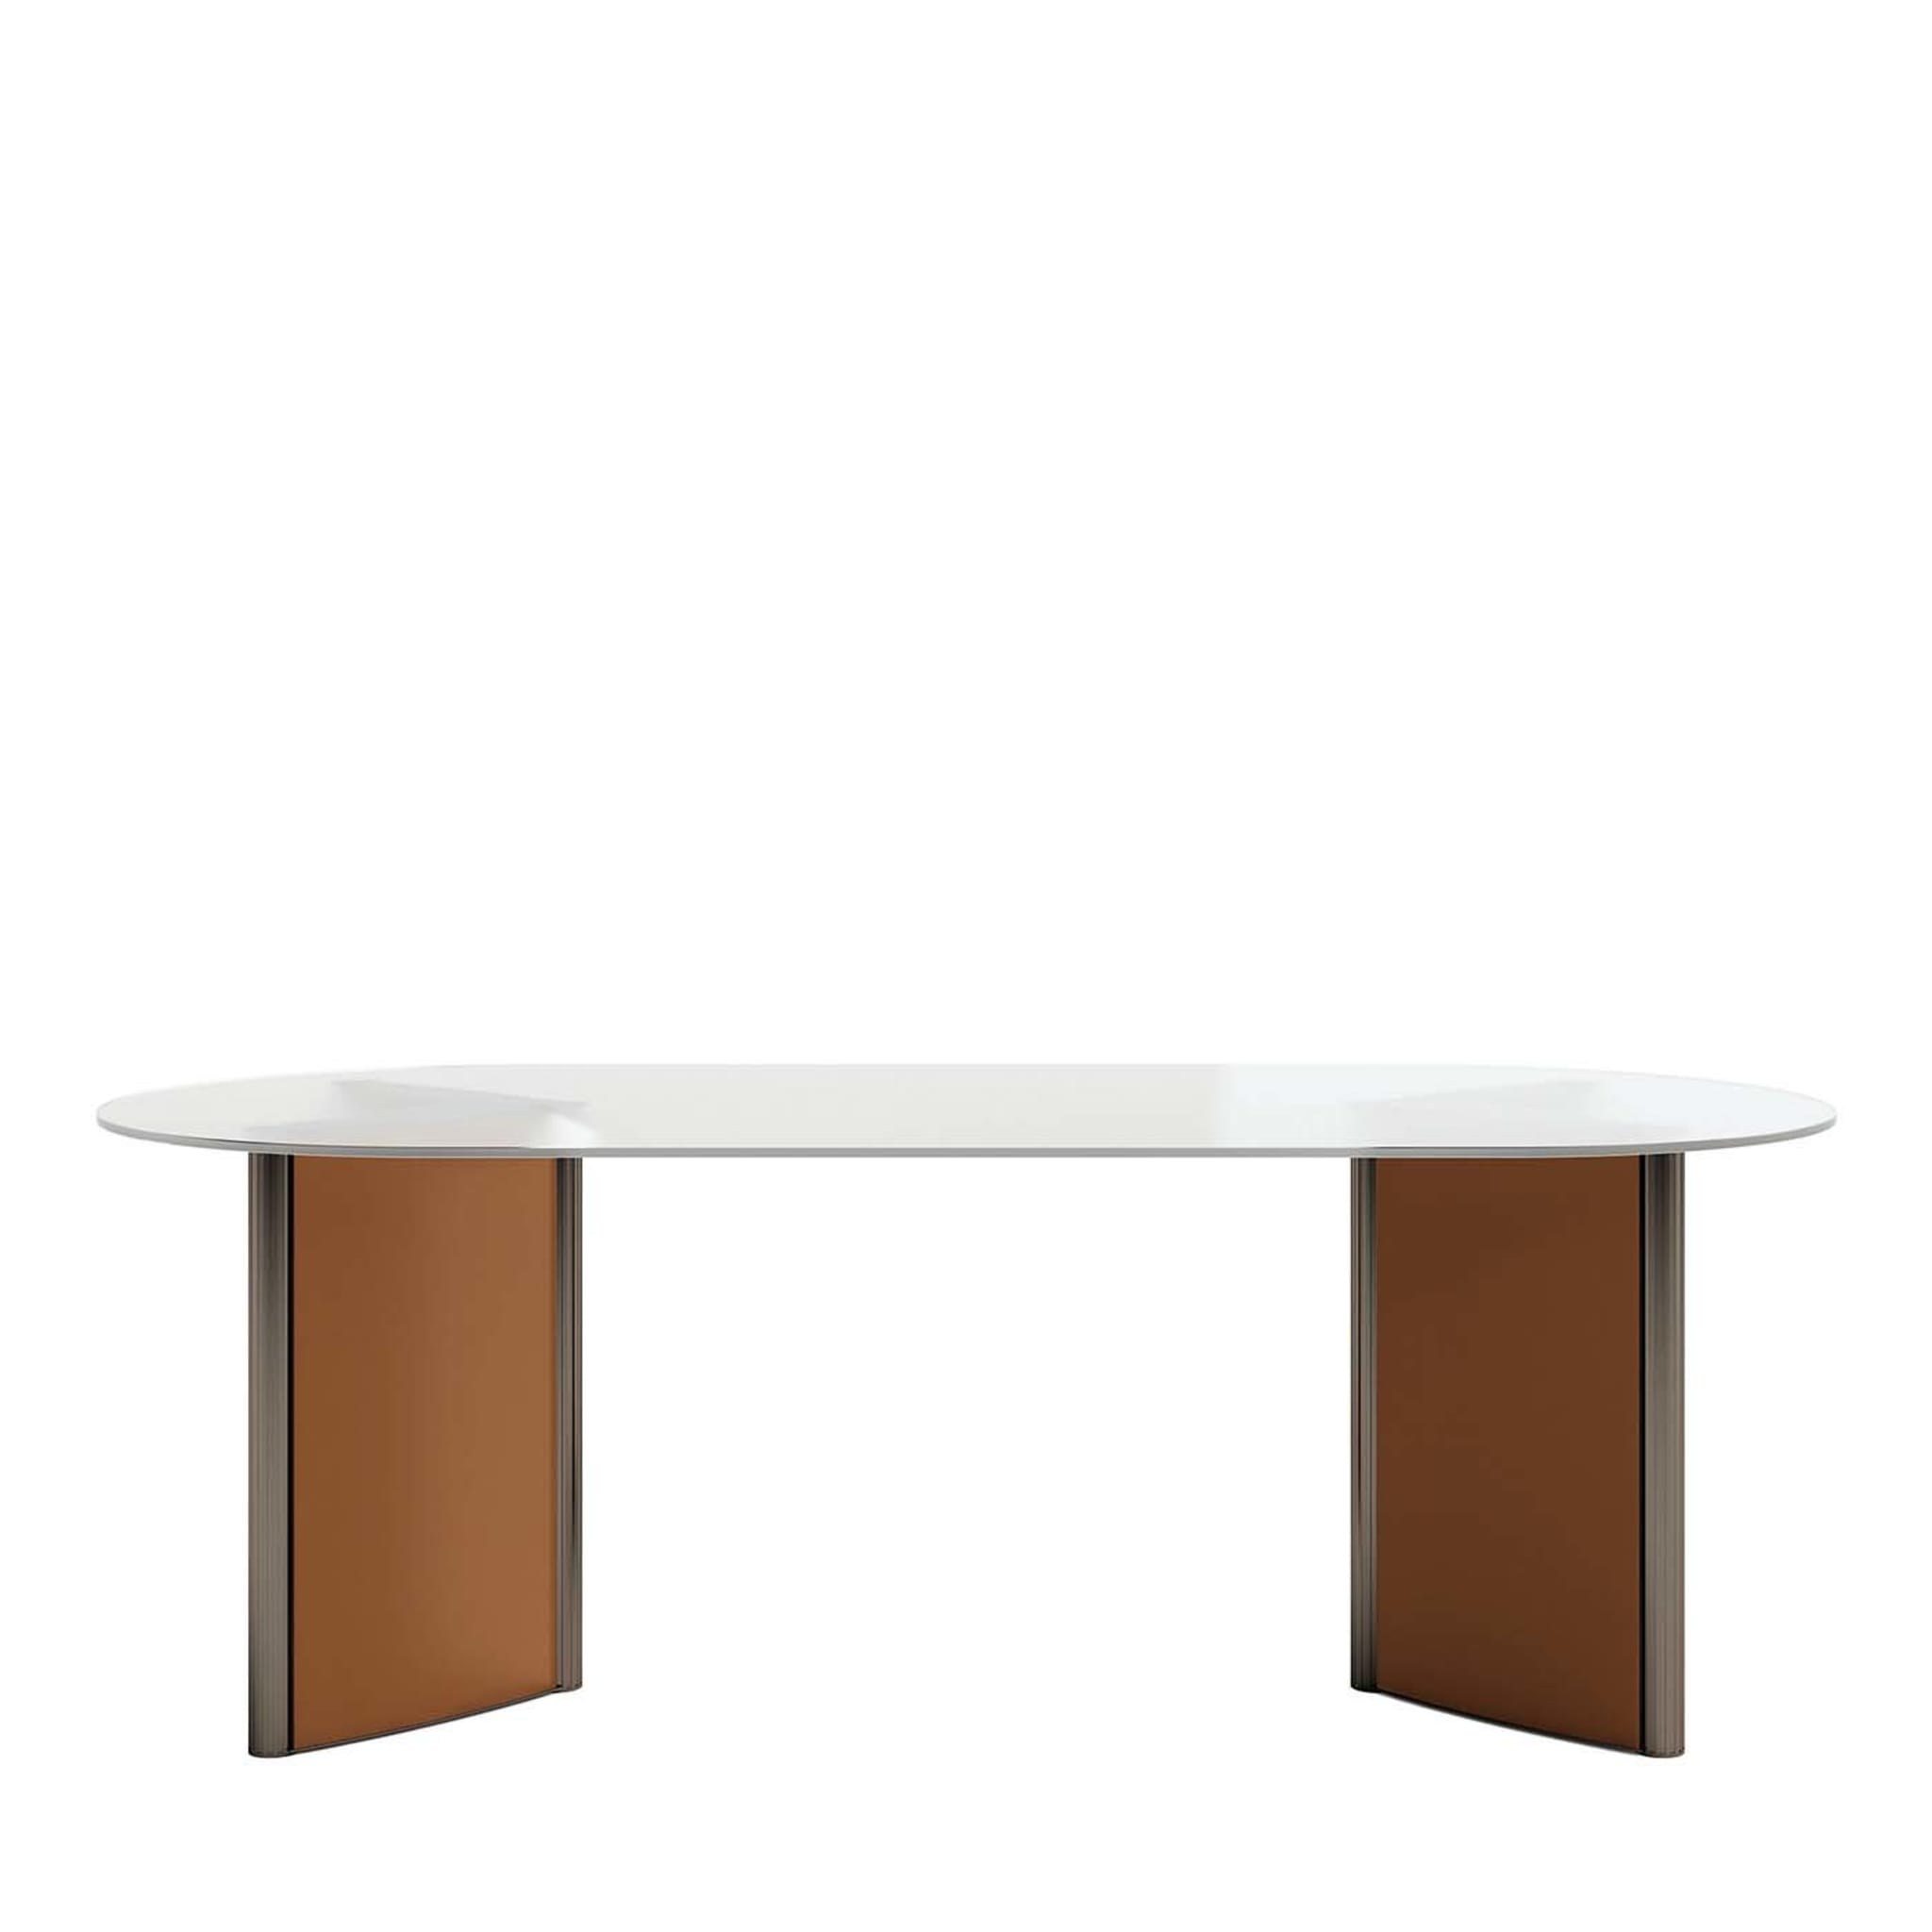 Valeo Meeting Table by Fauciglietti Engineering - Main view